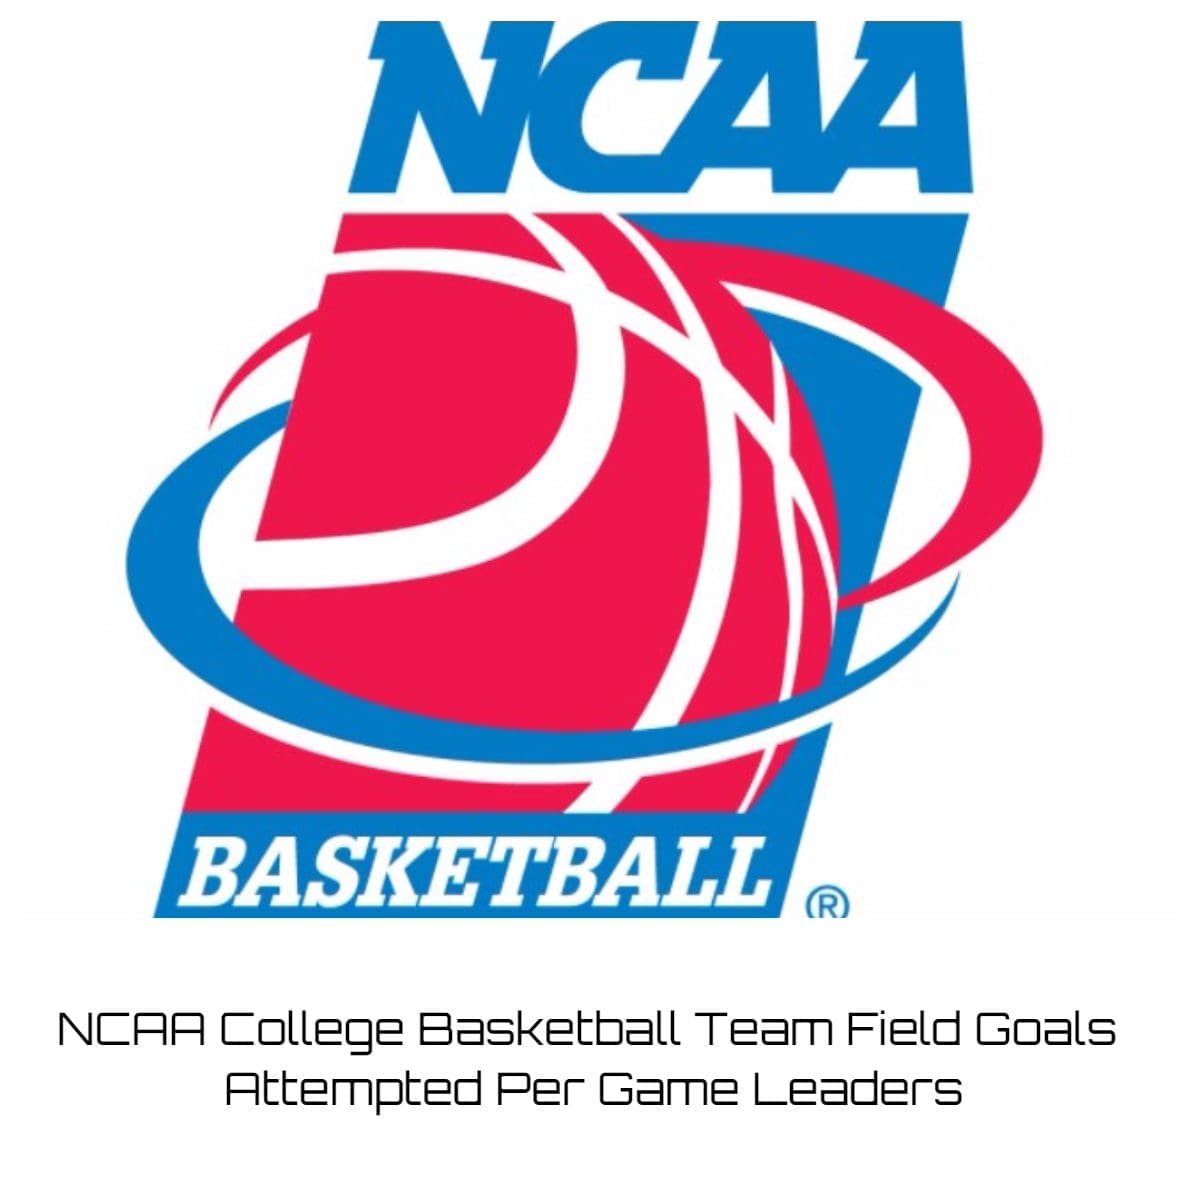 NCAA College Basketball Team Field Goals Attempted Per Game Leaders